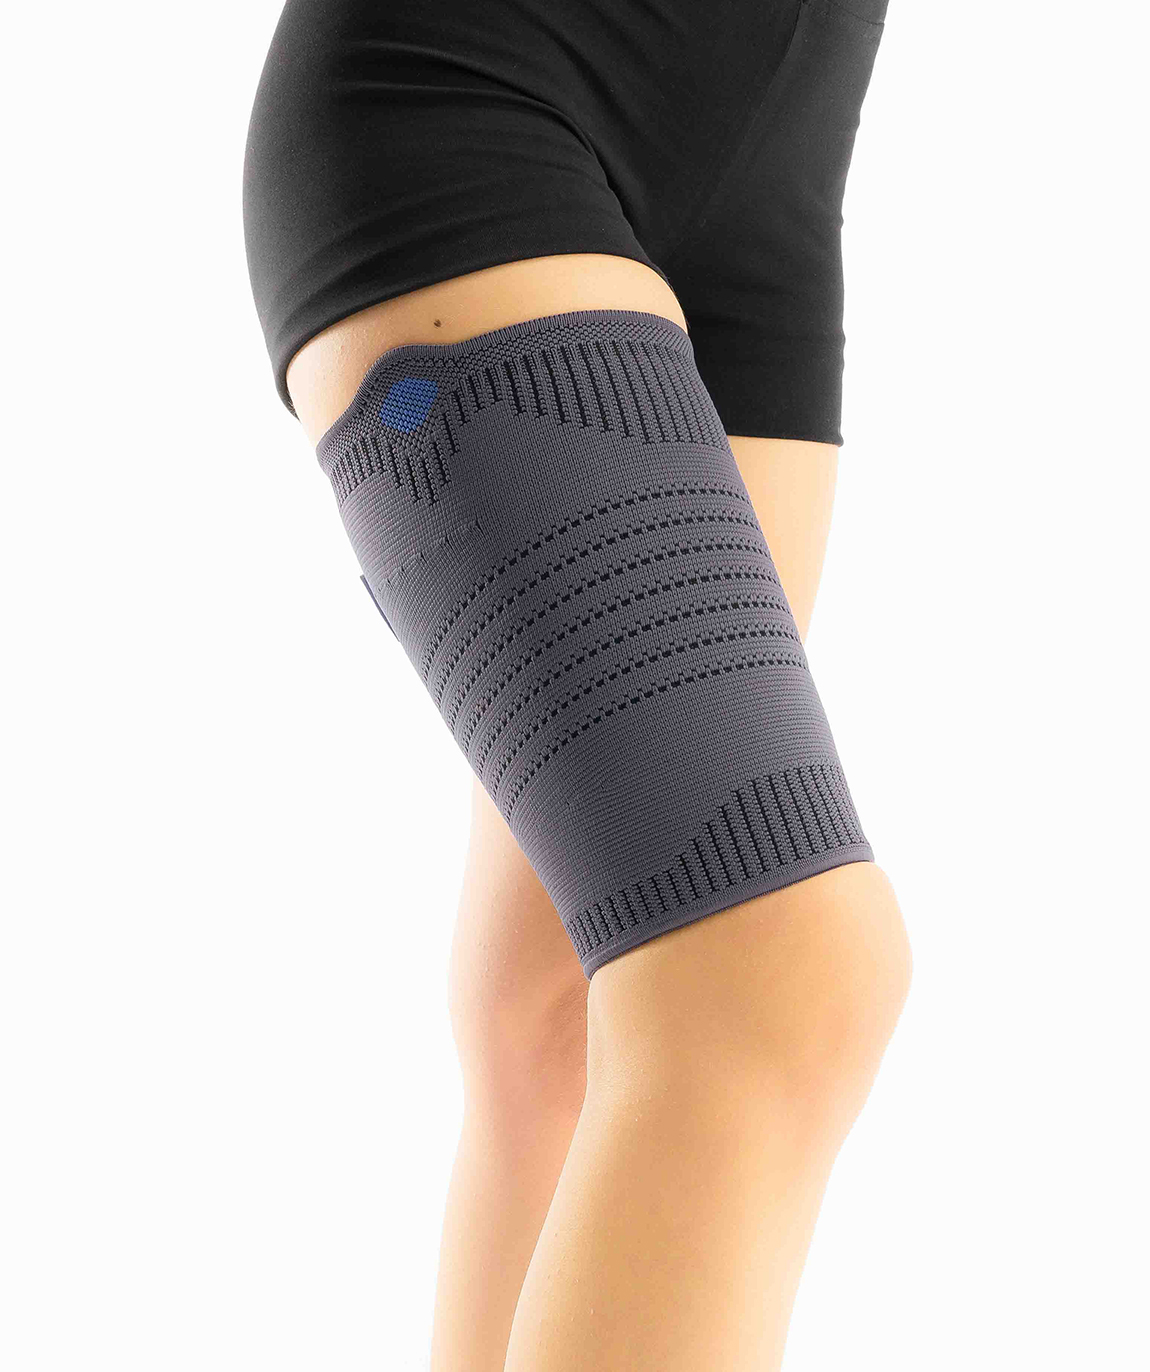 thigh support knitted fabric